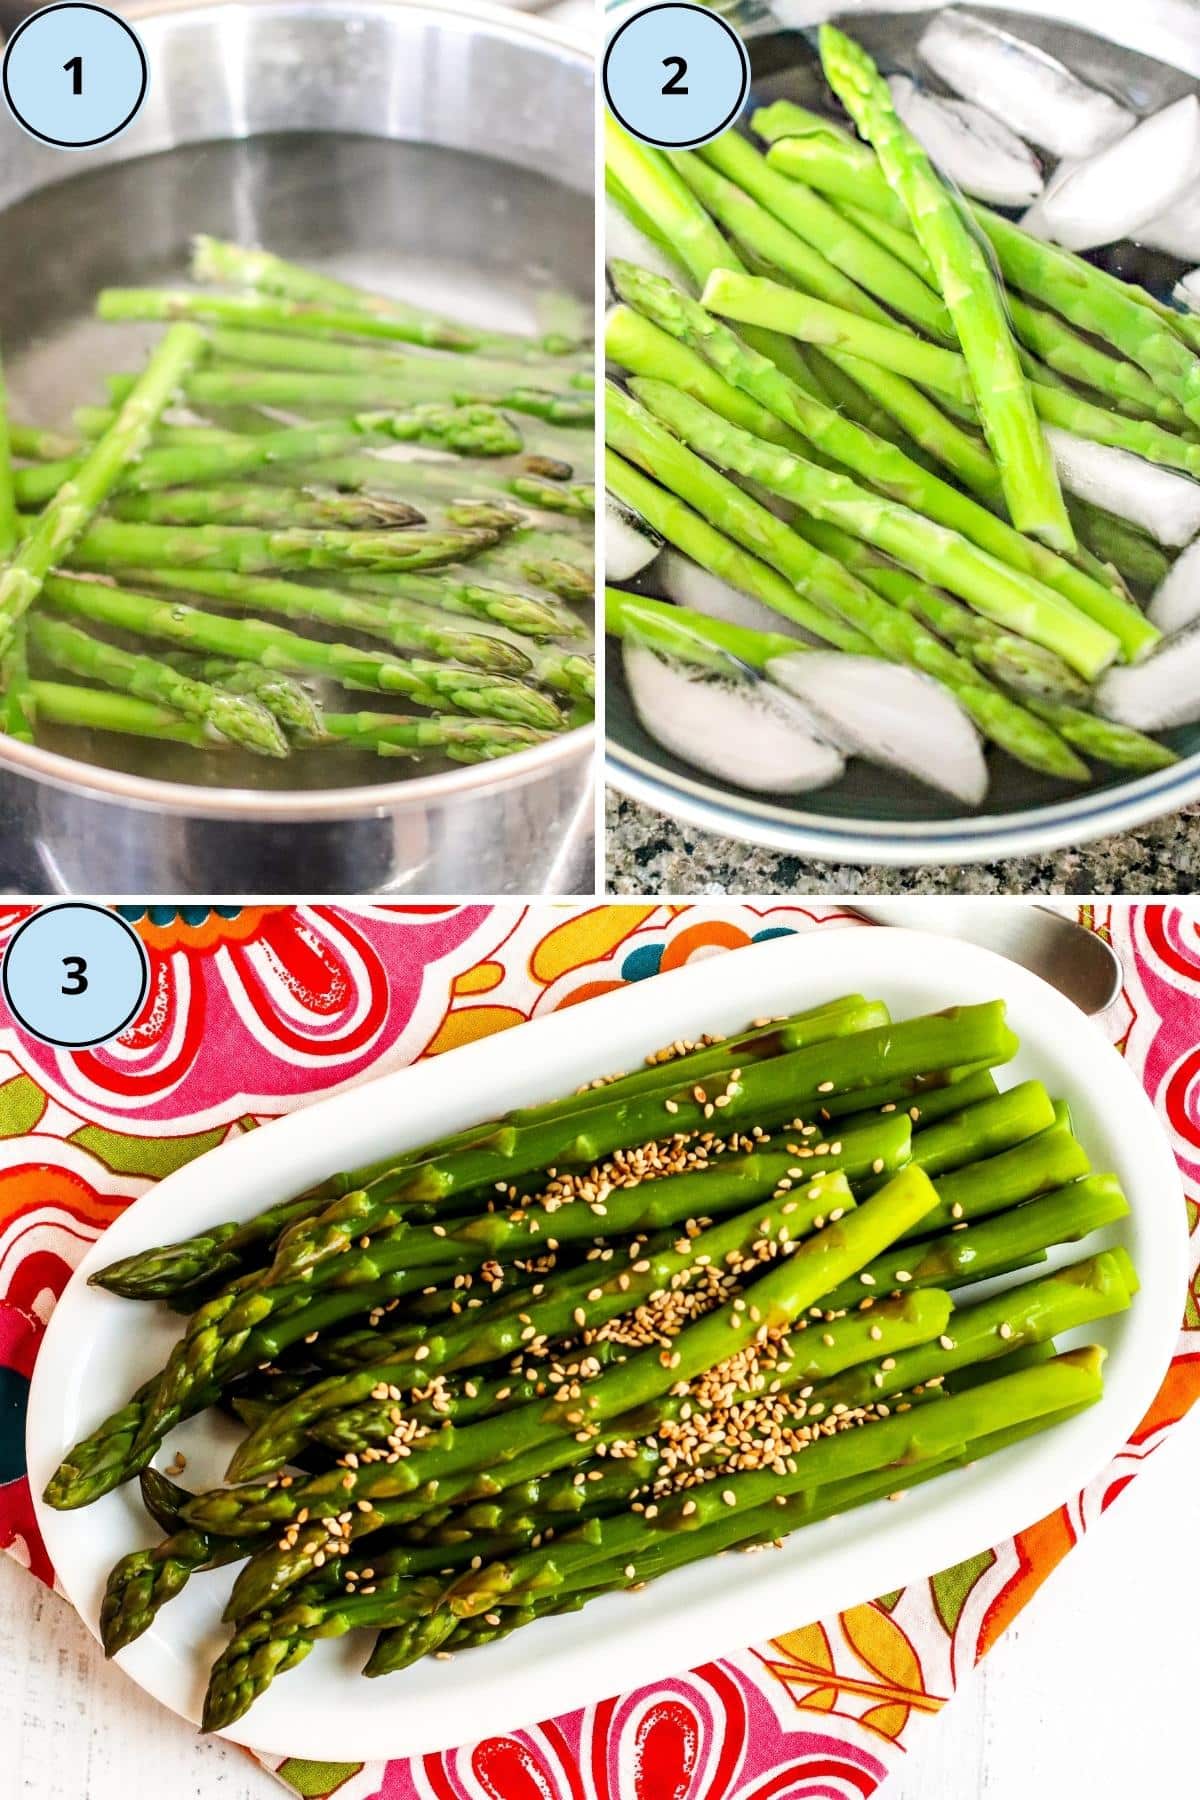 Collage of 3 images showing how to make marinated asparagus.